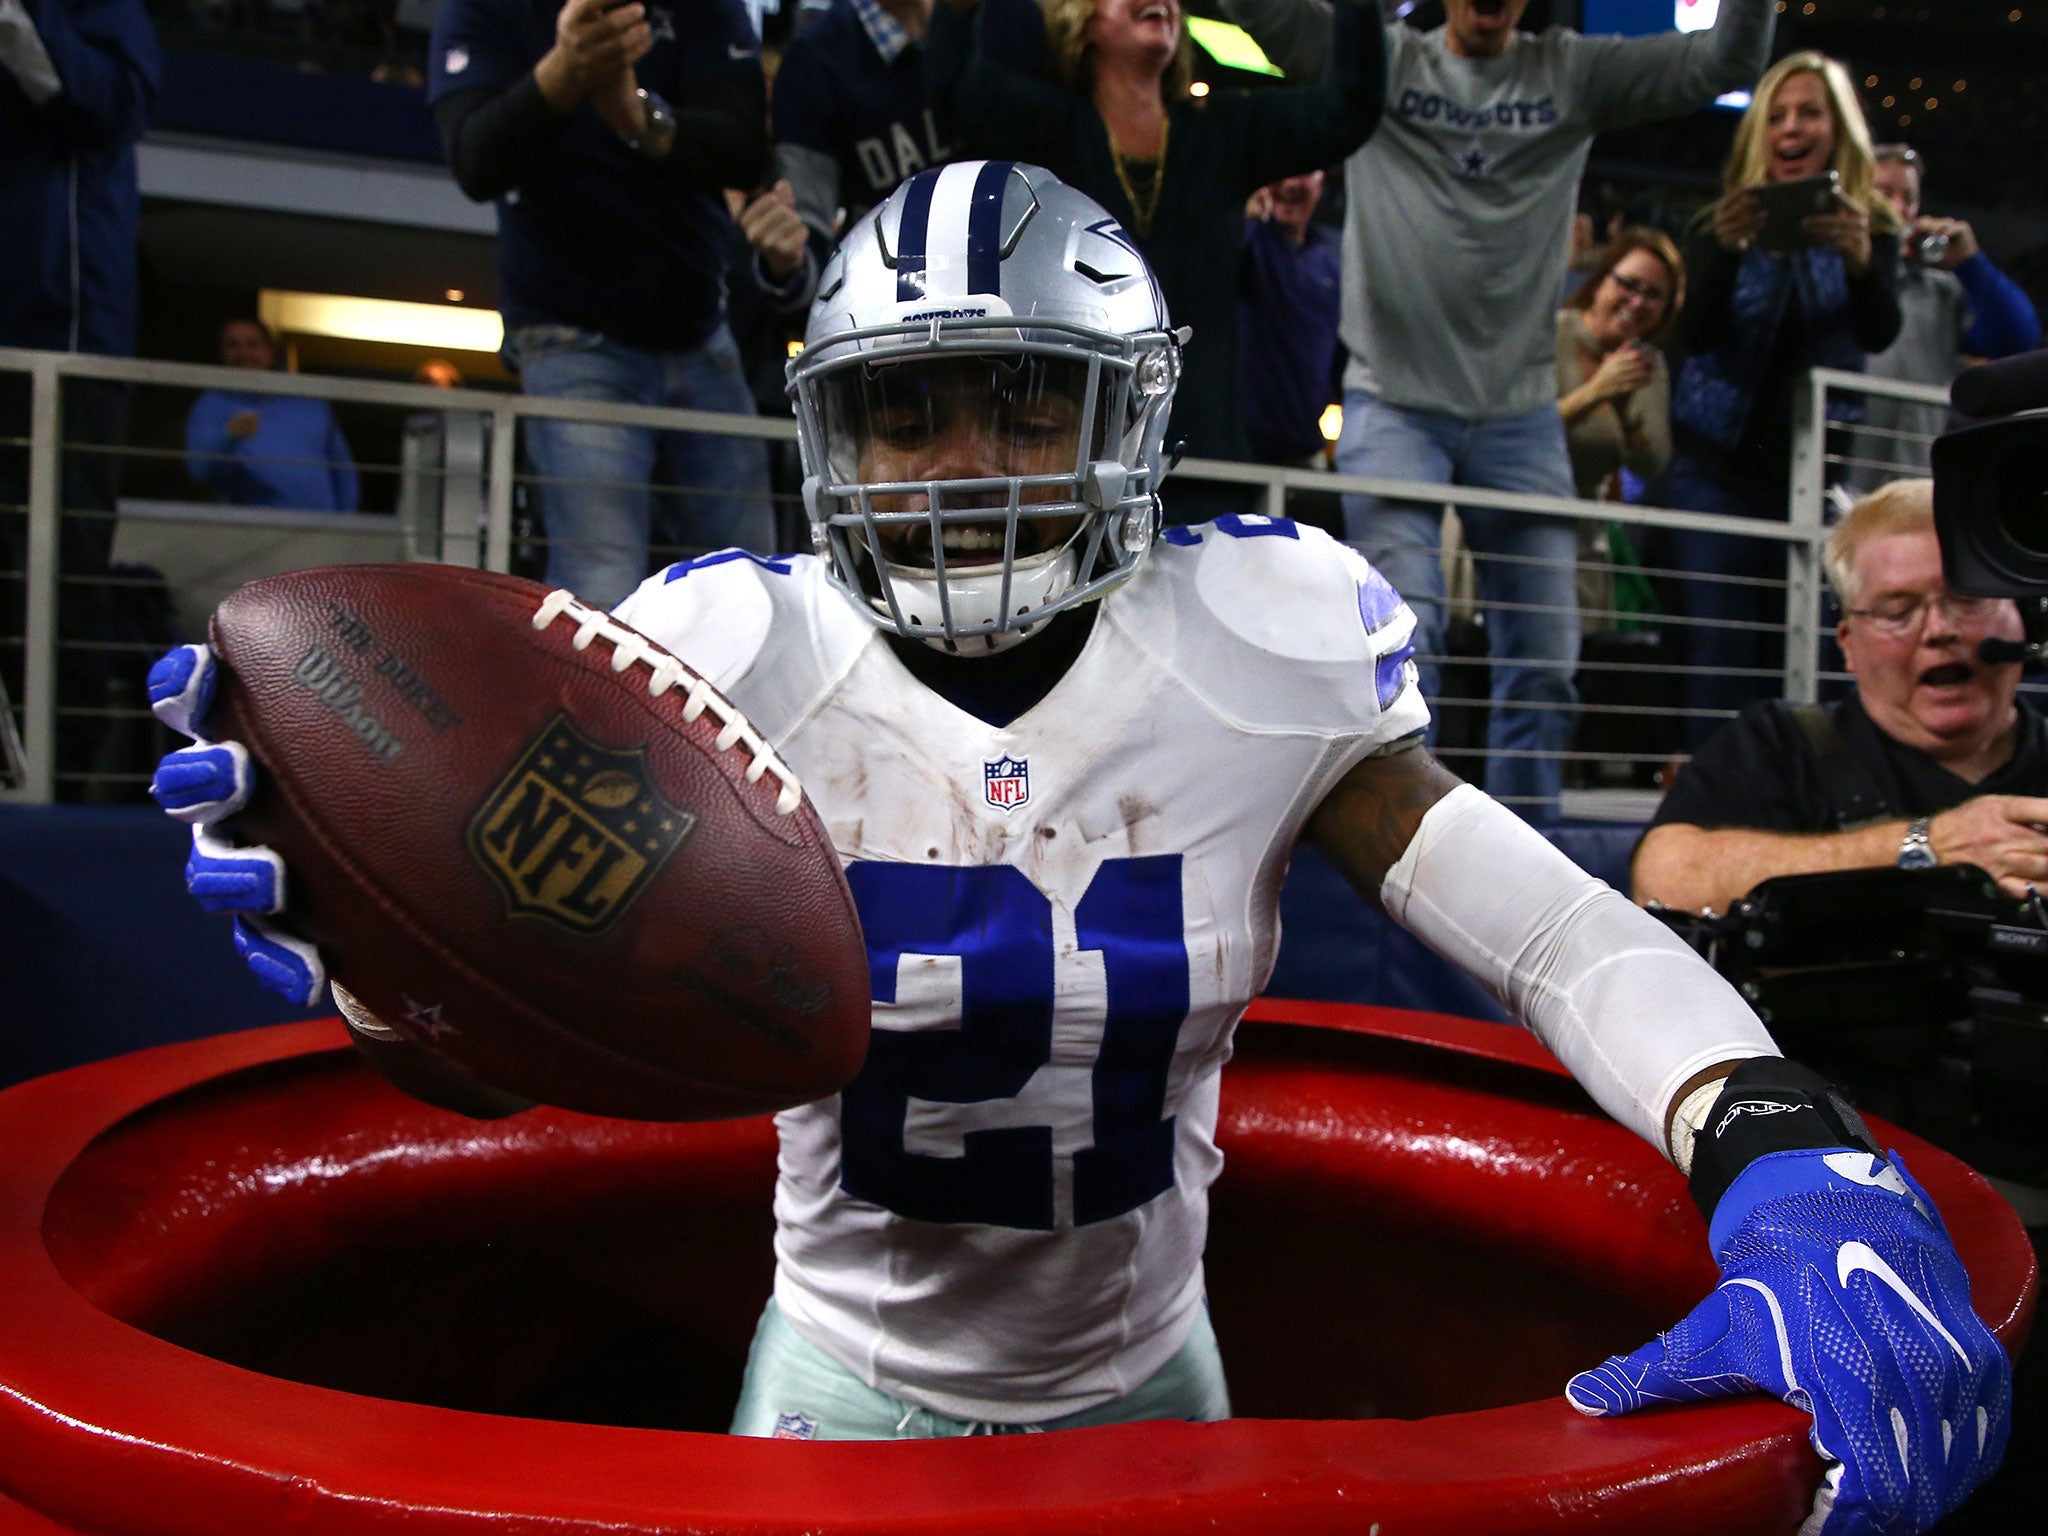 Ezekiel Elliot celebrated a touchdown for the Cowboys by jumping into a large red kettle